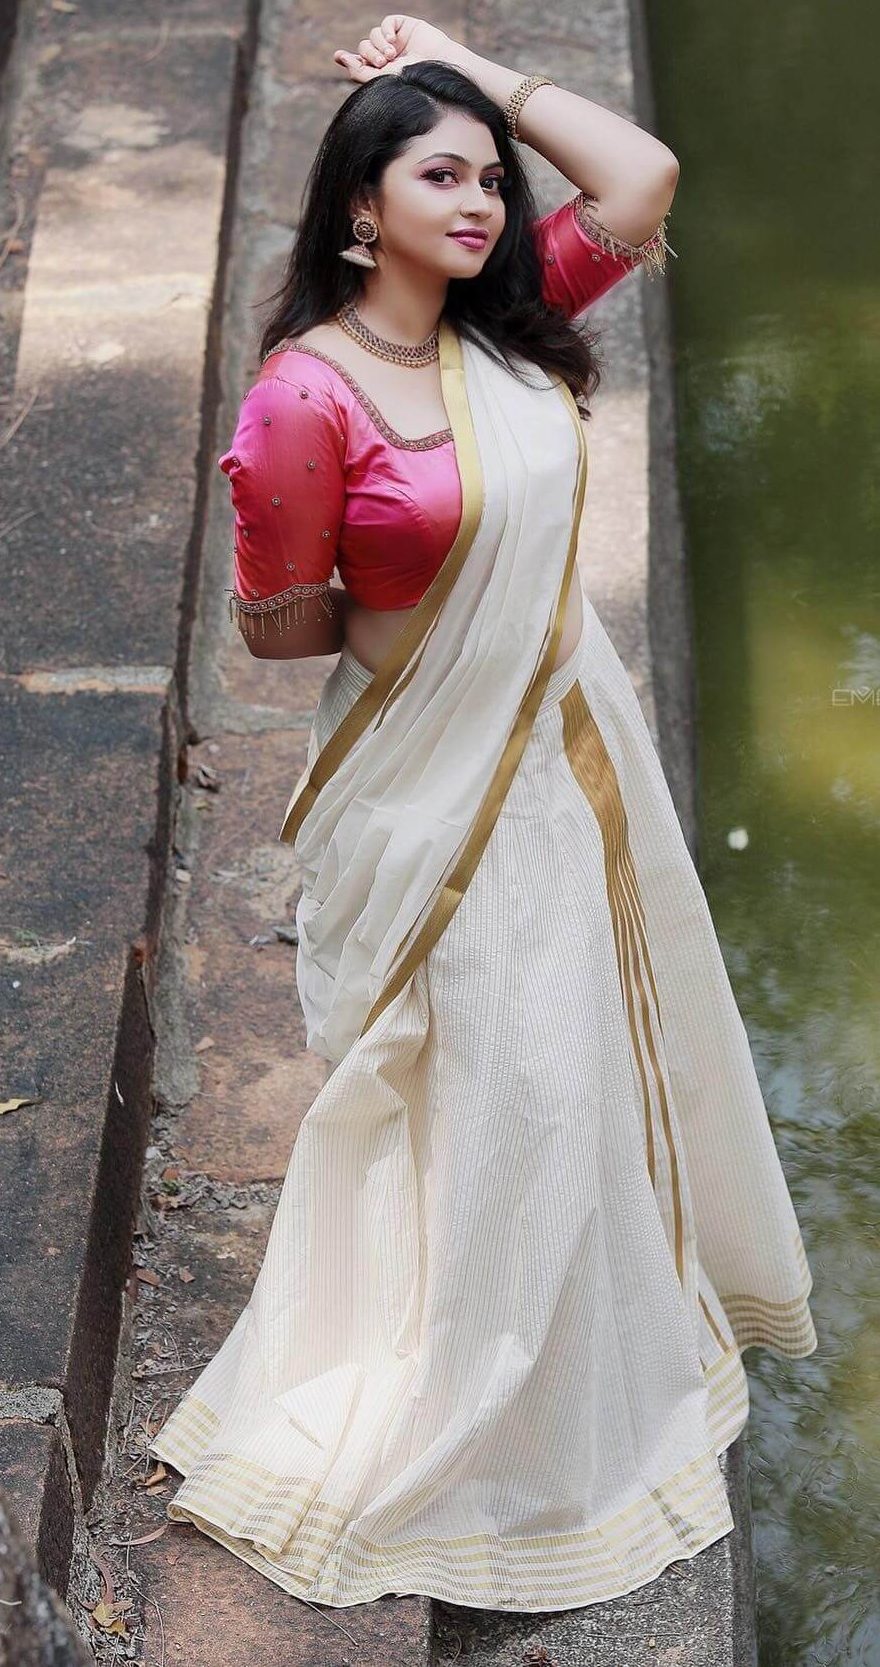 Arundhathi Nair In Traditional Off White & Golden Lehenga Saree Paired With Pink Blouse